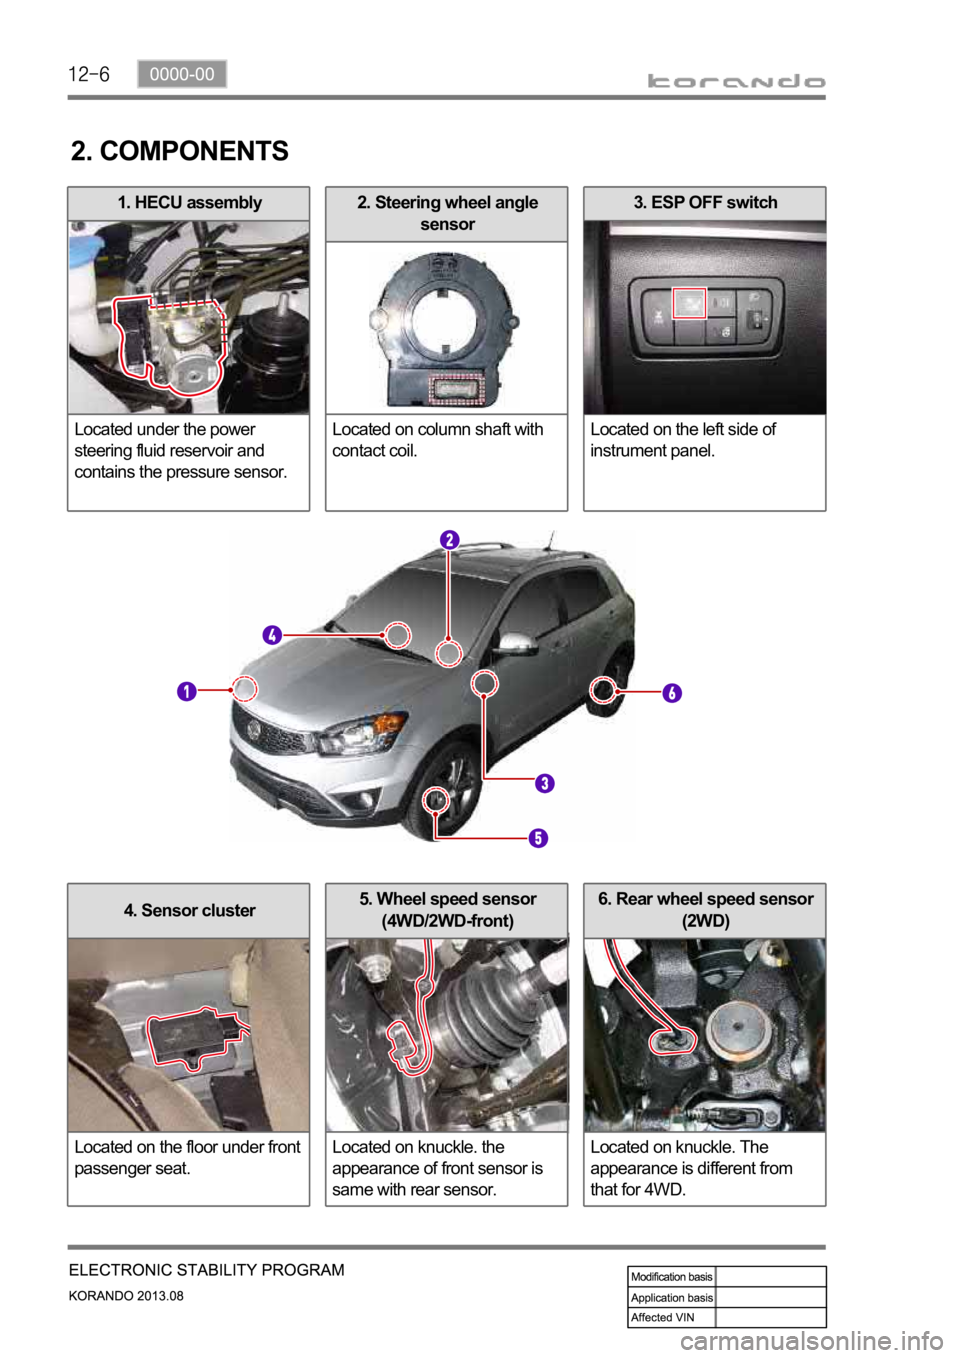 SSANGYONG KORANDO 2013  Service Manual 3. ESP OFF switch
Located on the left side of 
instrument panel.2. Steering wheel angle 
sensor
Located on column shaft with 
contact coil.1. HECU assembly
Located under the power 
steering fluid rese